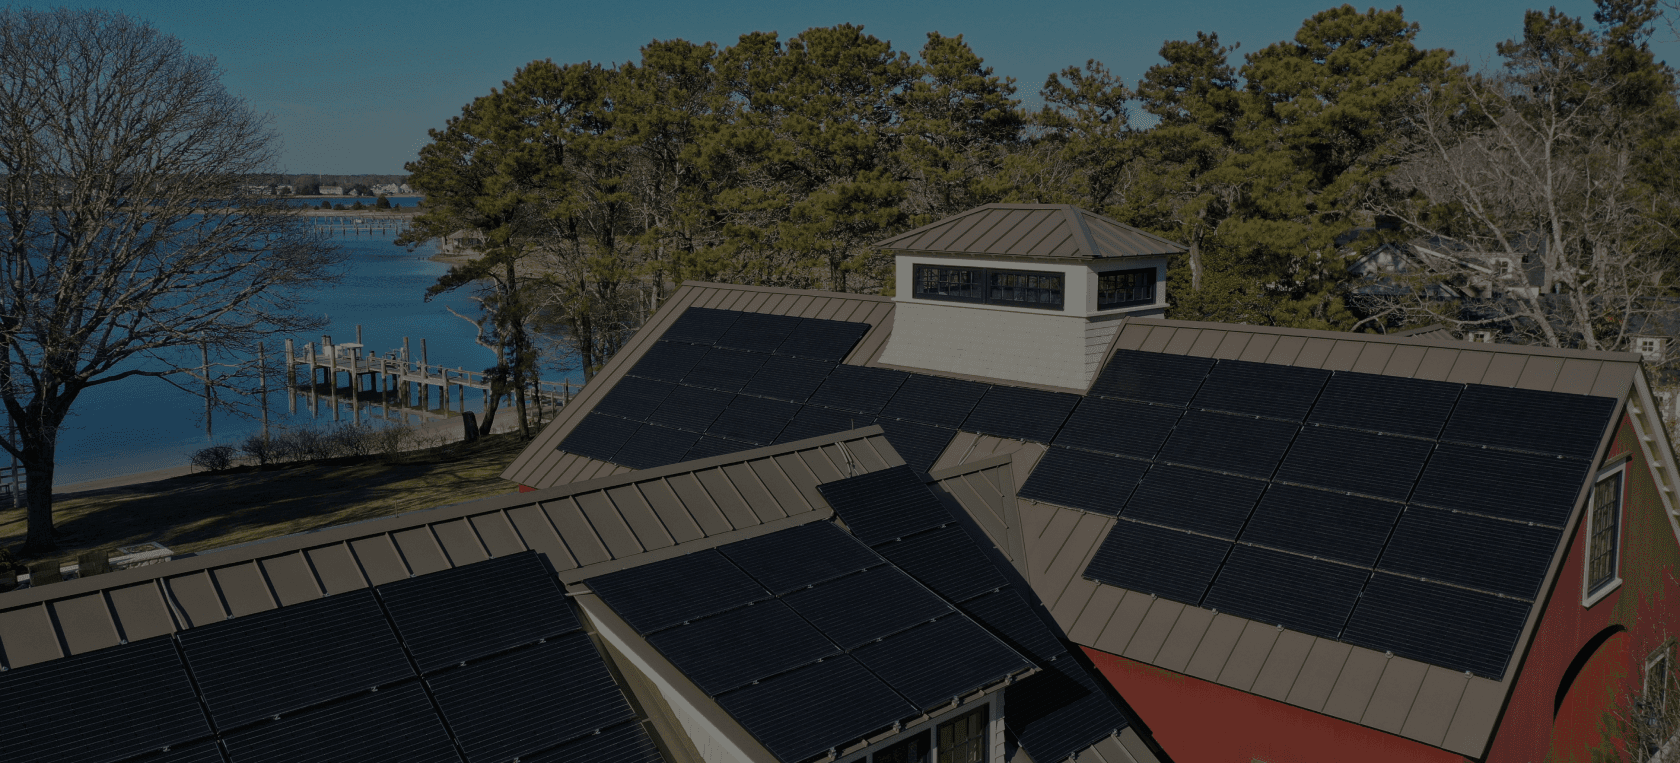 Solar Panels on Roofs of A Vermont Home Overlooking Champlain Lake